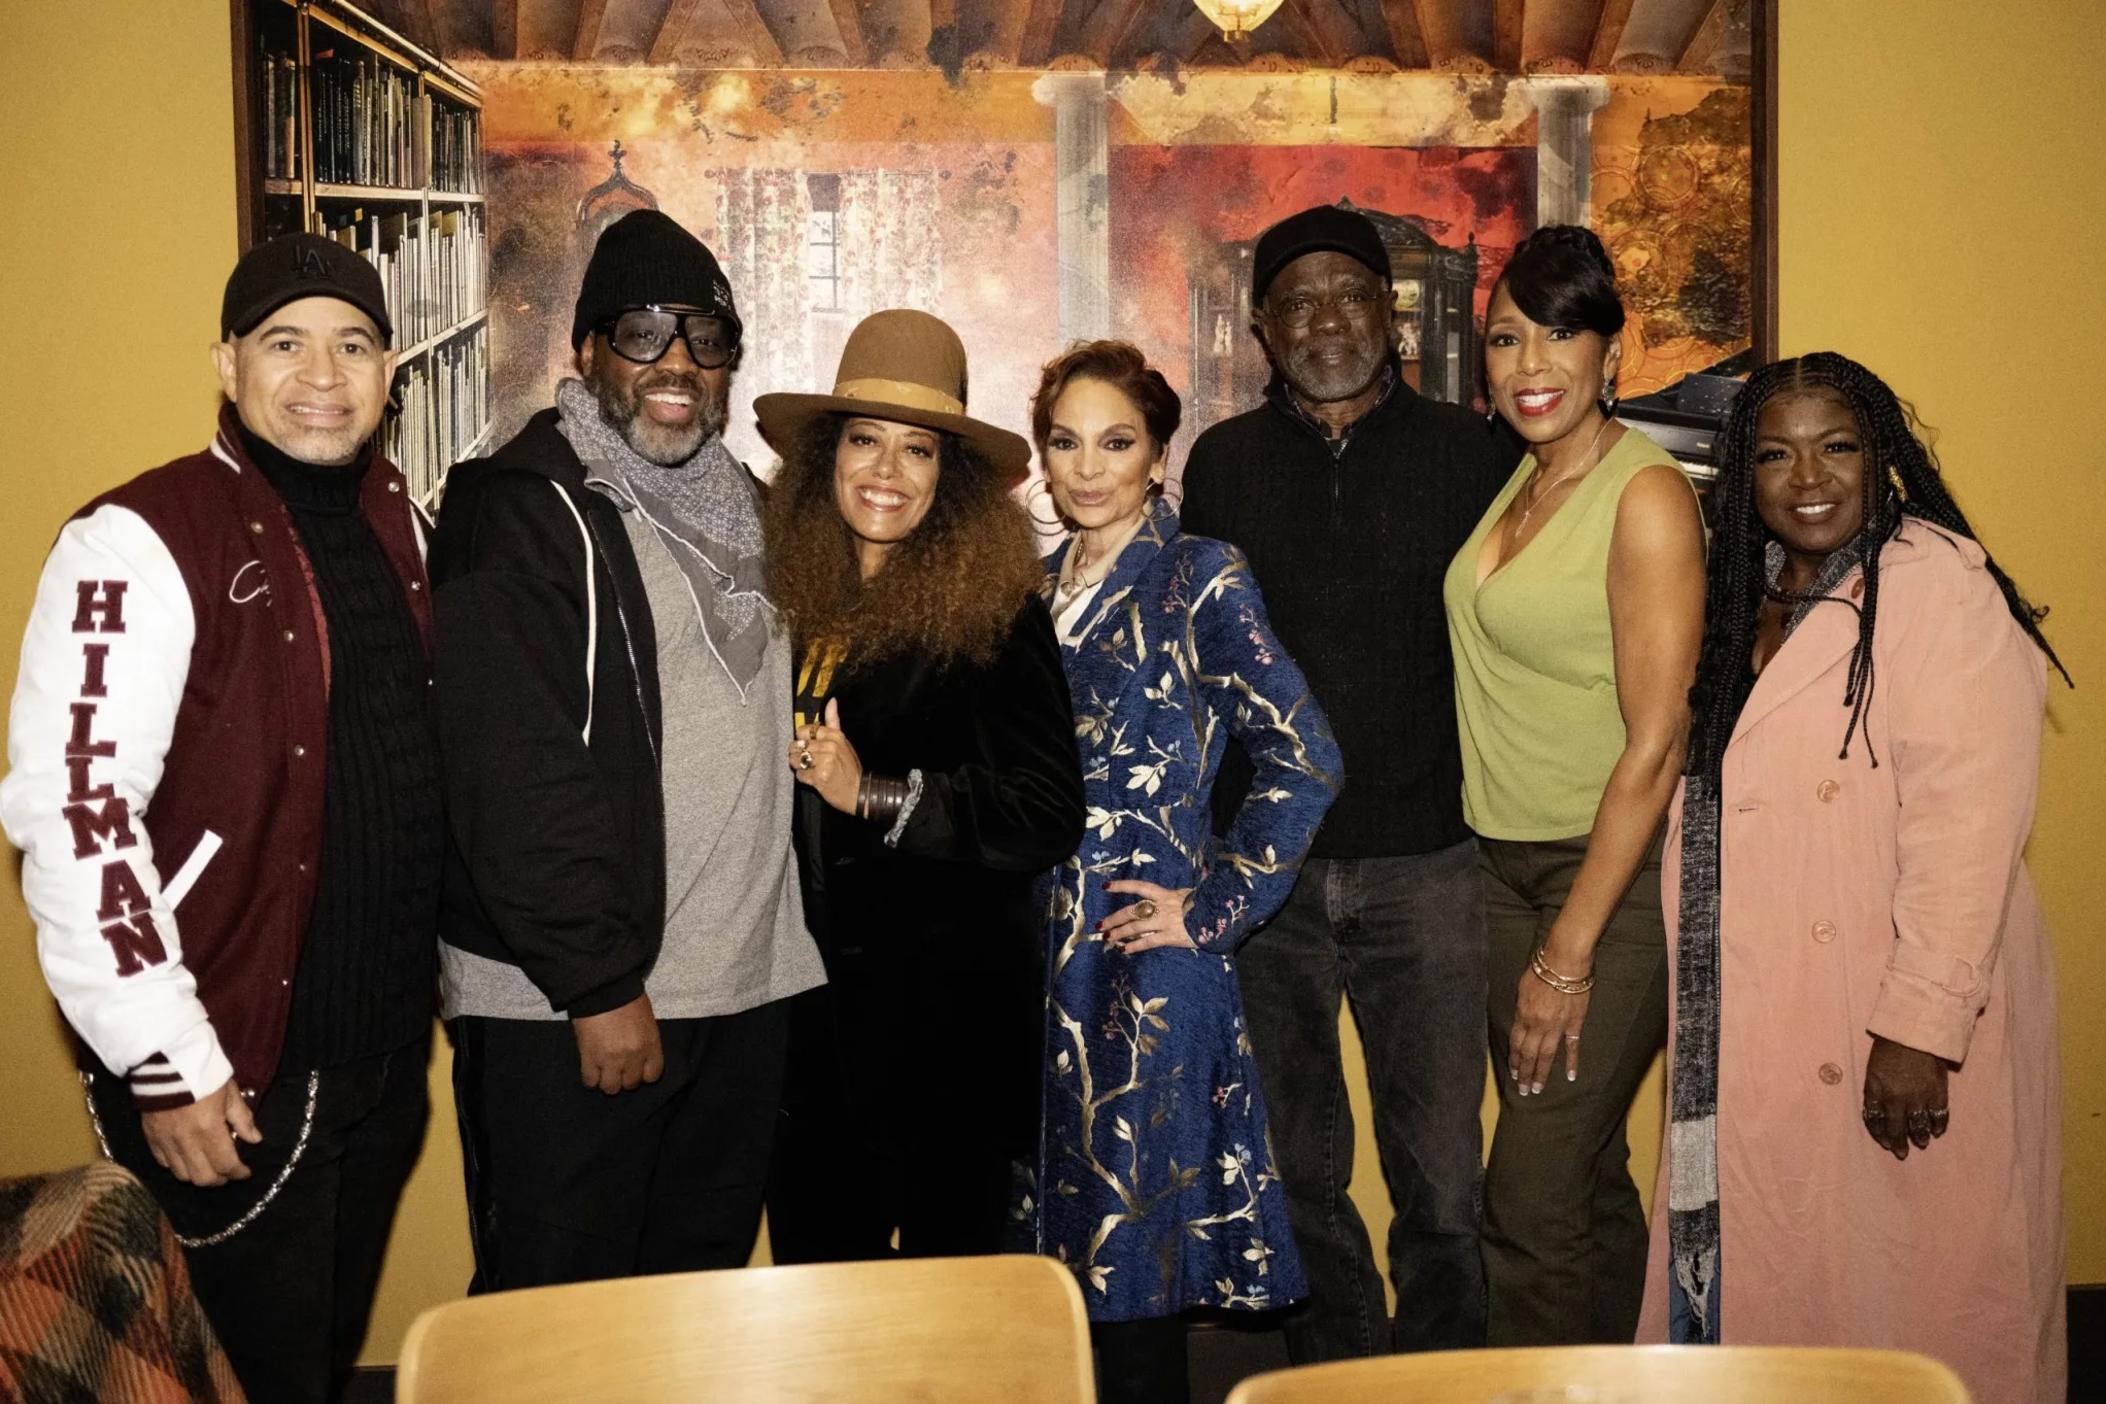 From left: actors Darryl M. Bell, Kadeem Hardison, Cree Summer, Jasmine Guy,  Glynn Turman, Dawnn Lewis and Charnele Brown visited a restaurant in Atlanta's Old Fourth Ward for a tip-off dinner ahead of their national HBCU tour in honor of the iconic NBC television series, “A Different World,” and its impact on generations of Black youth.